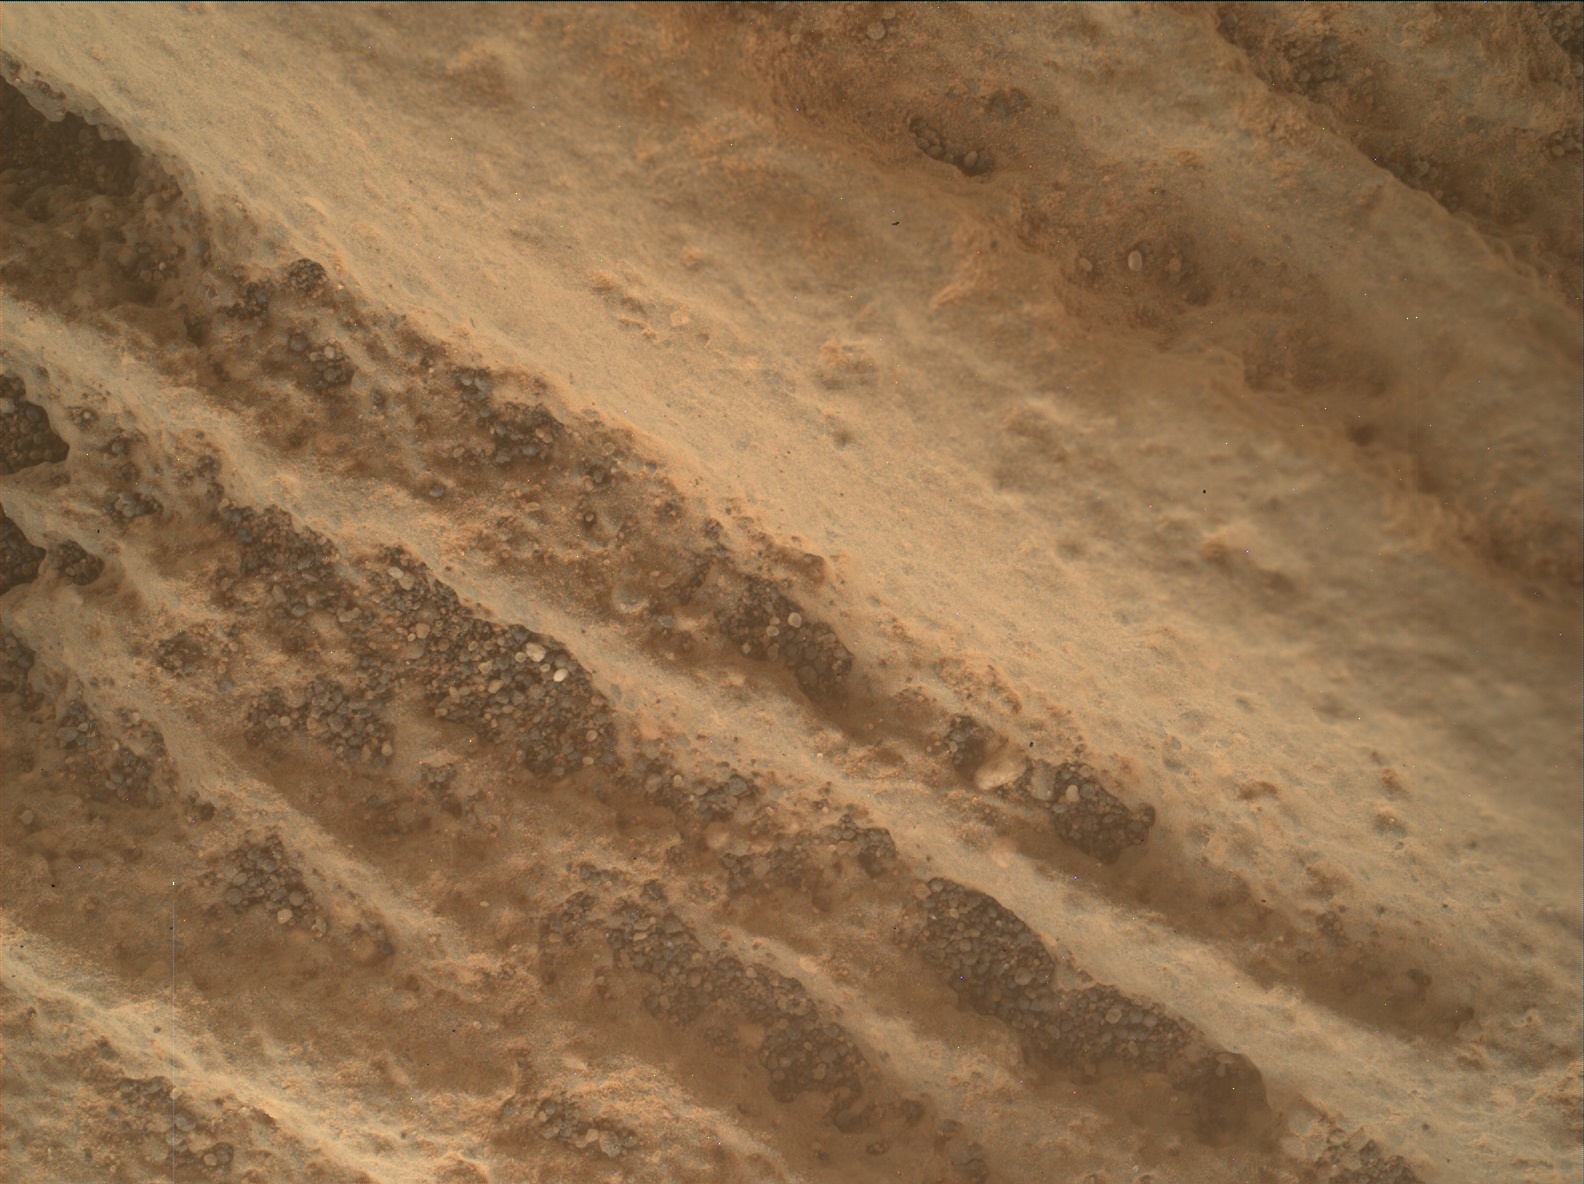 Nasa's Mars rover Curiosity acquired this image using its Mars Hand Lens Imager (MAHLI) on Sol 3313